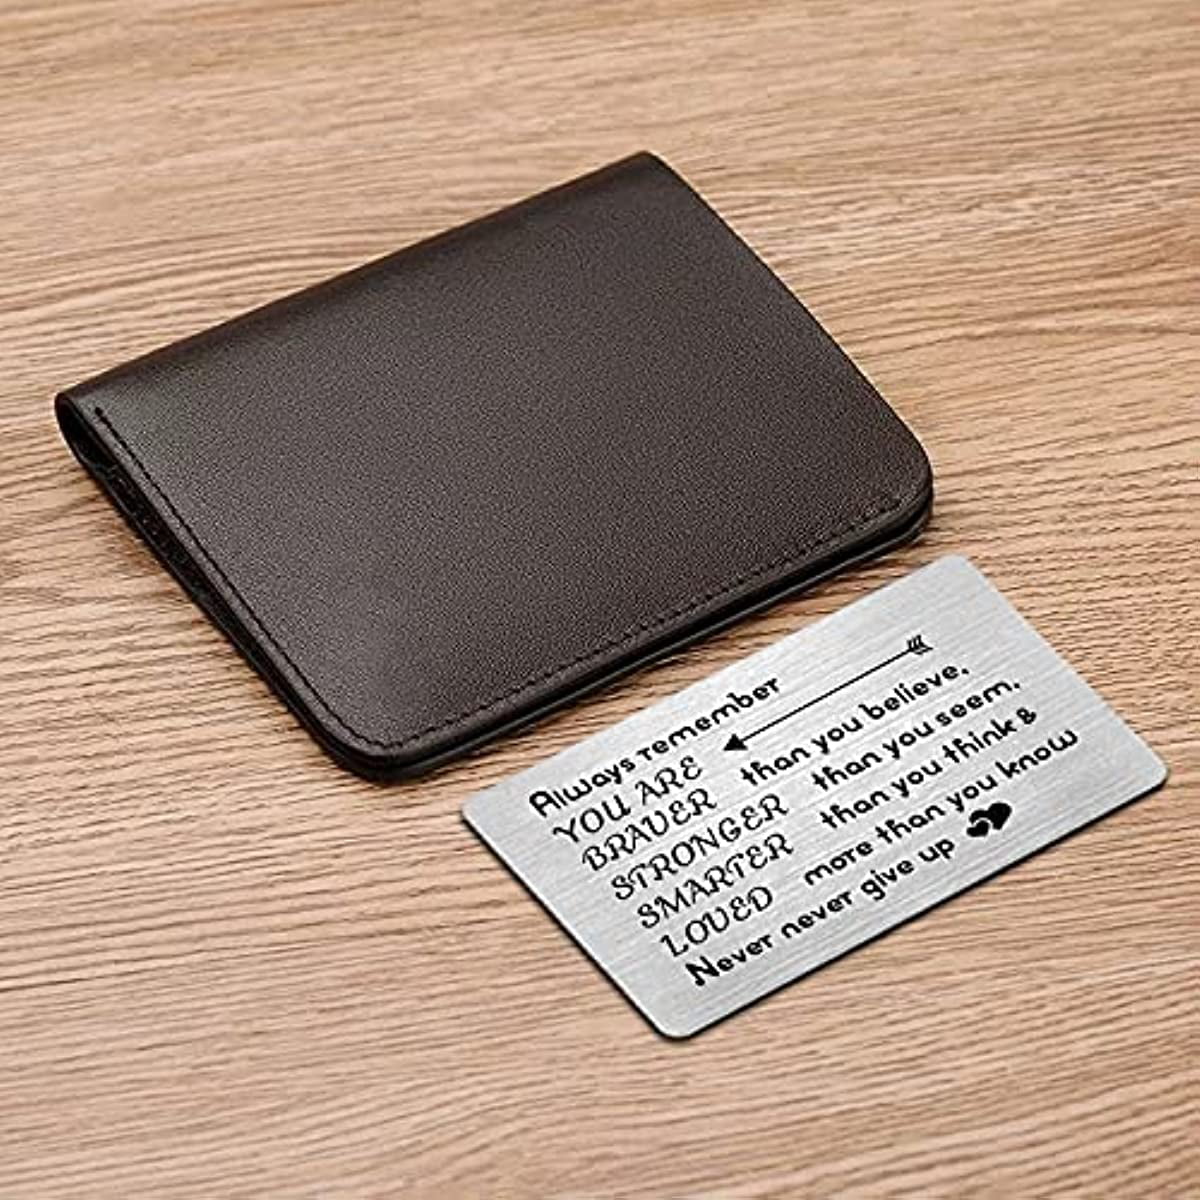 Alexsix Mini Engraved Wallet Card Commemorative Card Metal Love Note Insert Anniversary Gifts for Wife/Husband New, Women's, Size: One Size